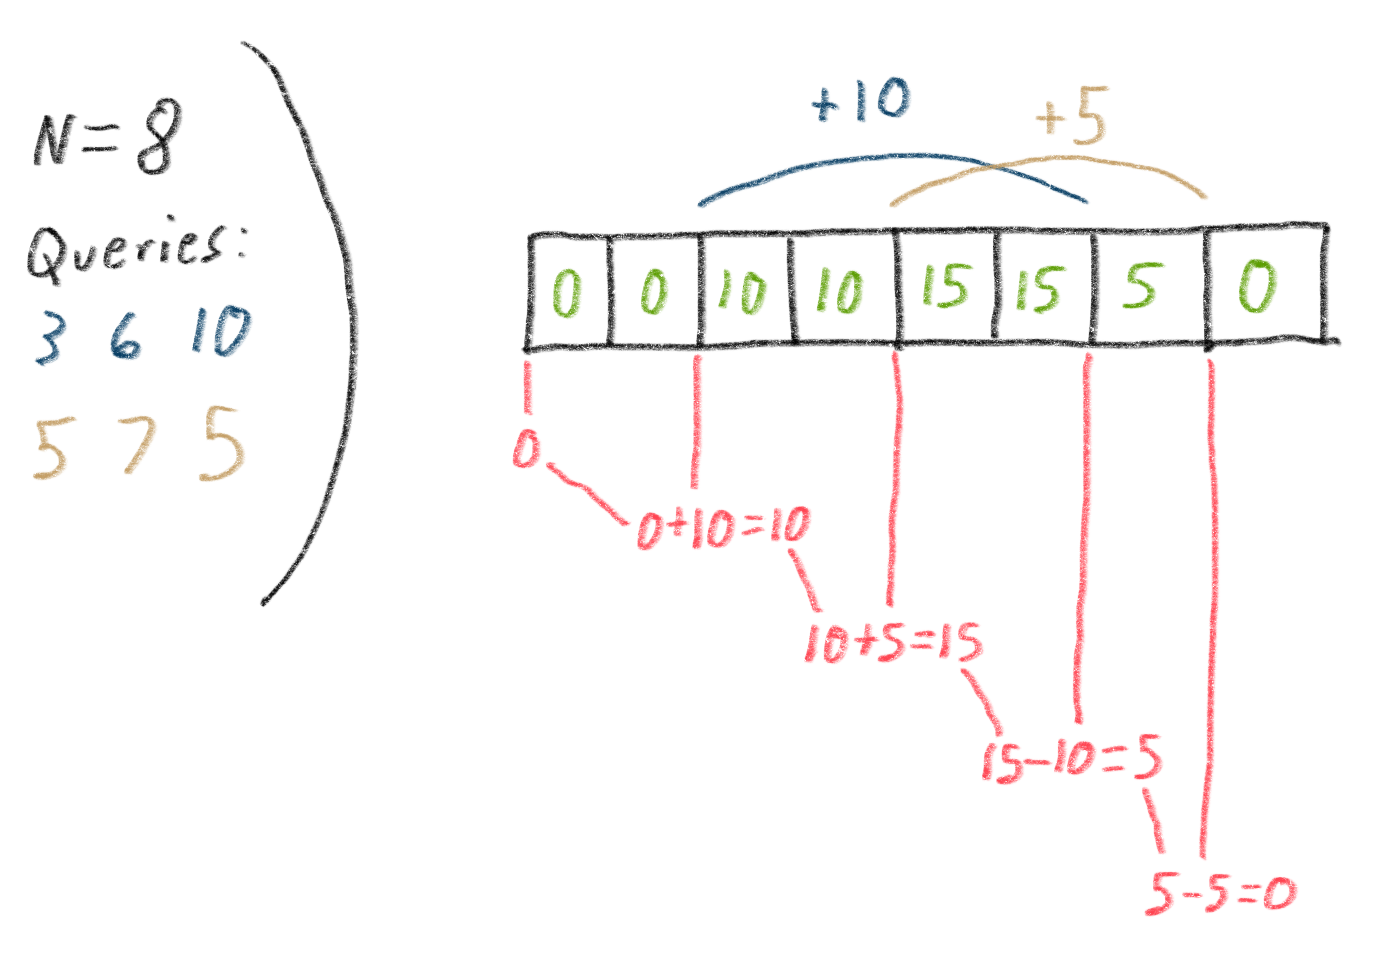 Diagram for N=8 with queries 3 6 10 and 5 7 5, showing that you can get the correct results by keeping a running sum that you increment when you reach an index that is the beginning of some query's range and decrement when you reach an index that is the end of some query's range.